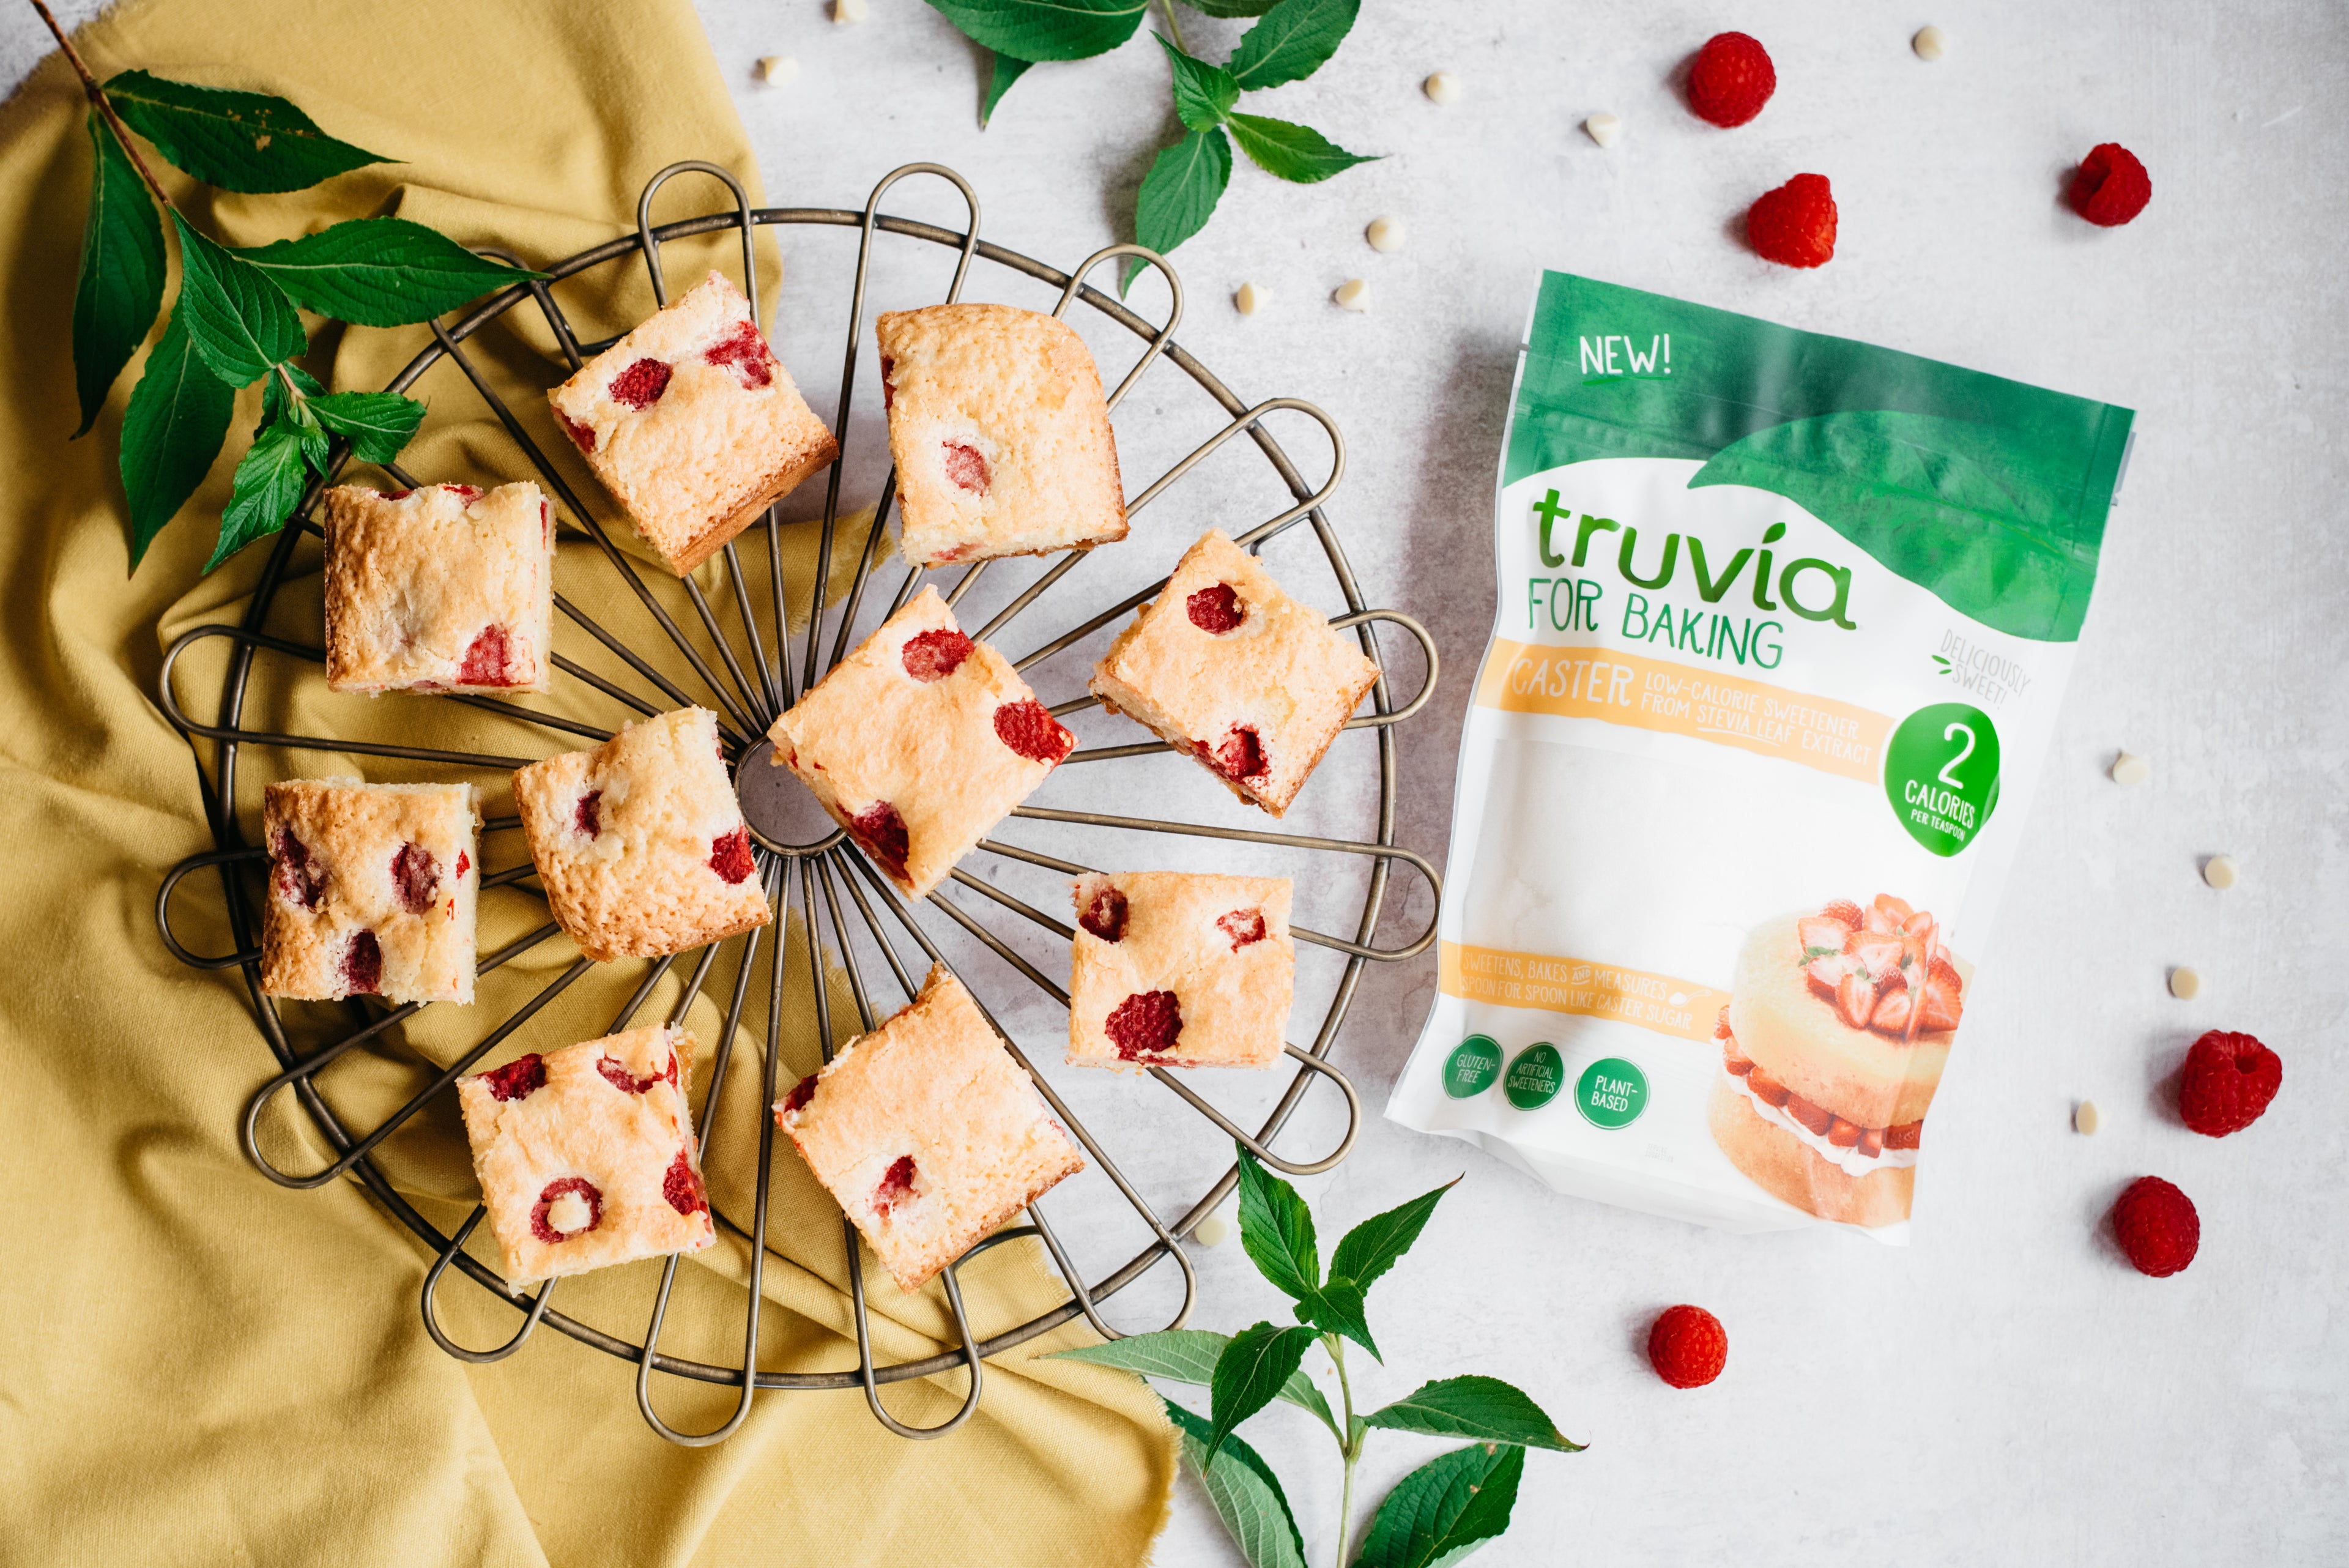 Top down view of some blondies next to a pack of truvia for baking brown